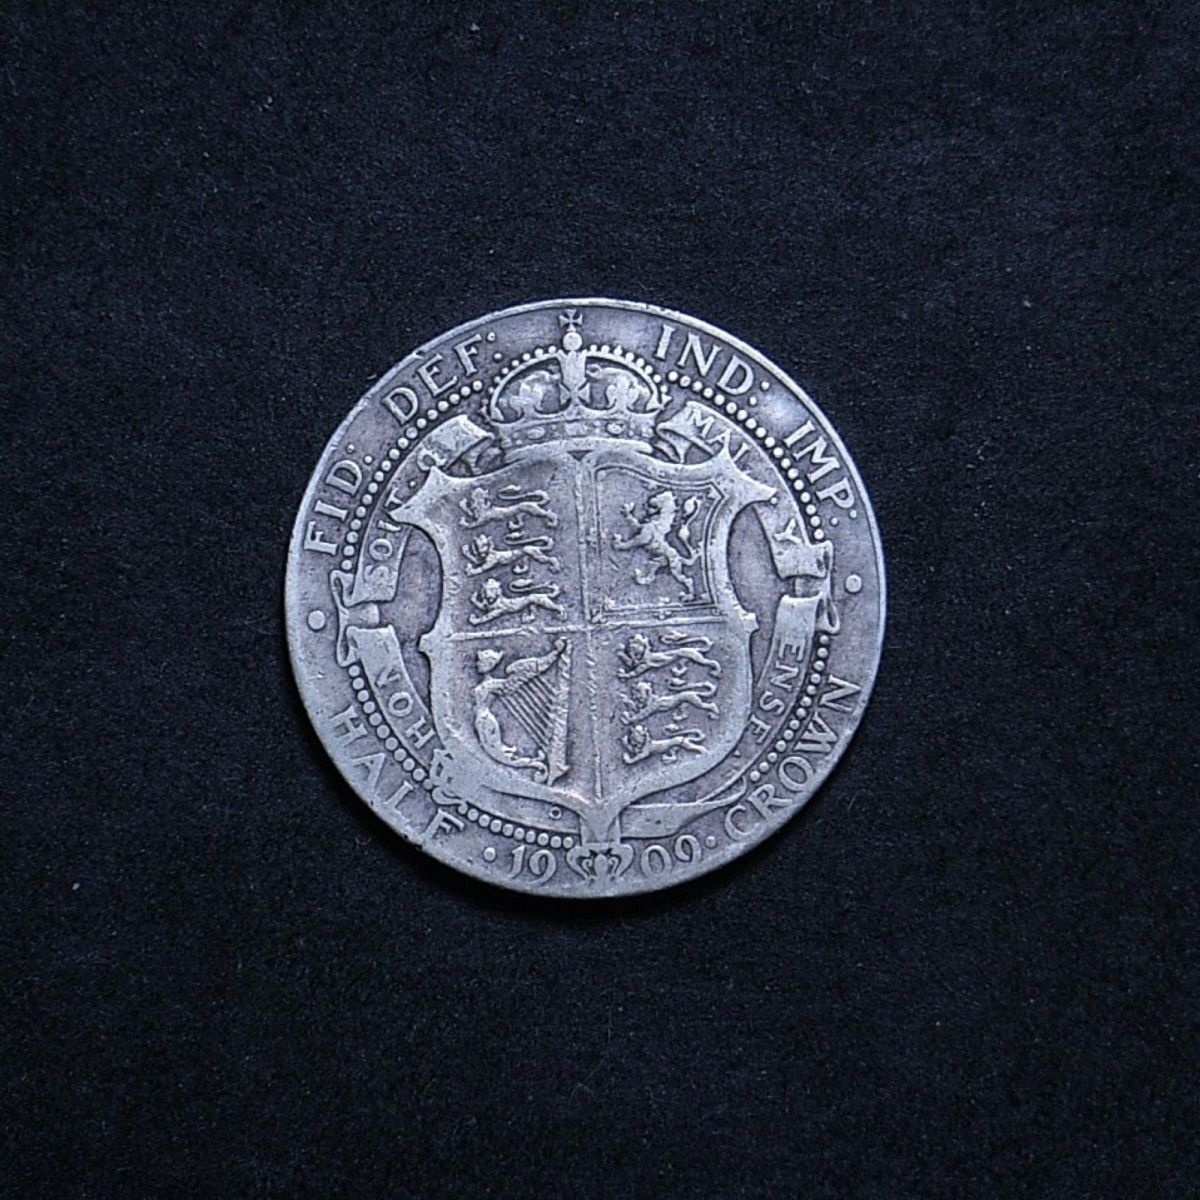 UK Half Crown 1909 reverse showing overall appearance